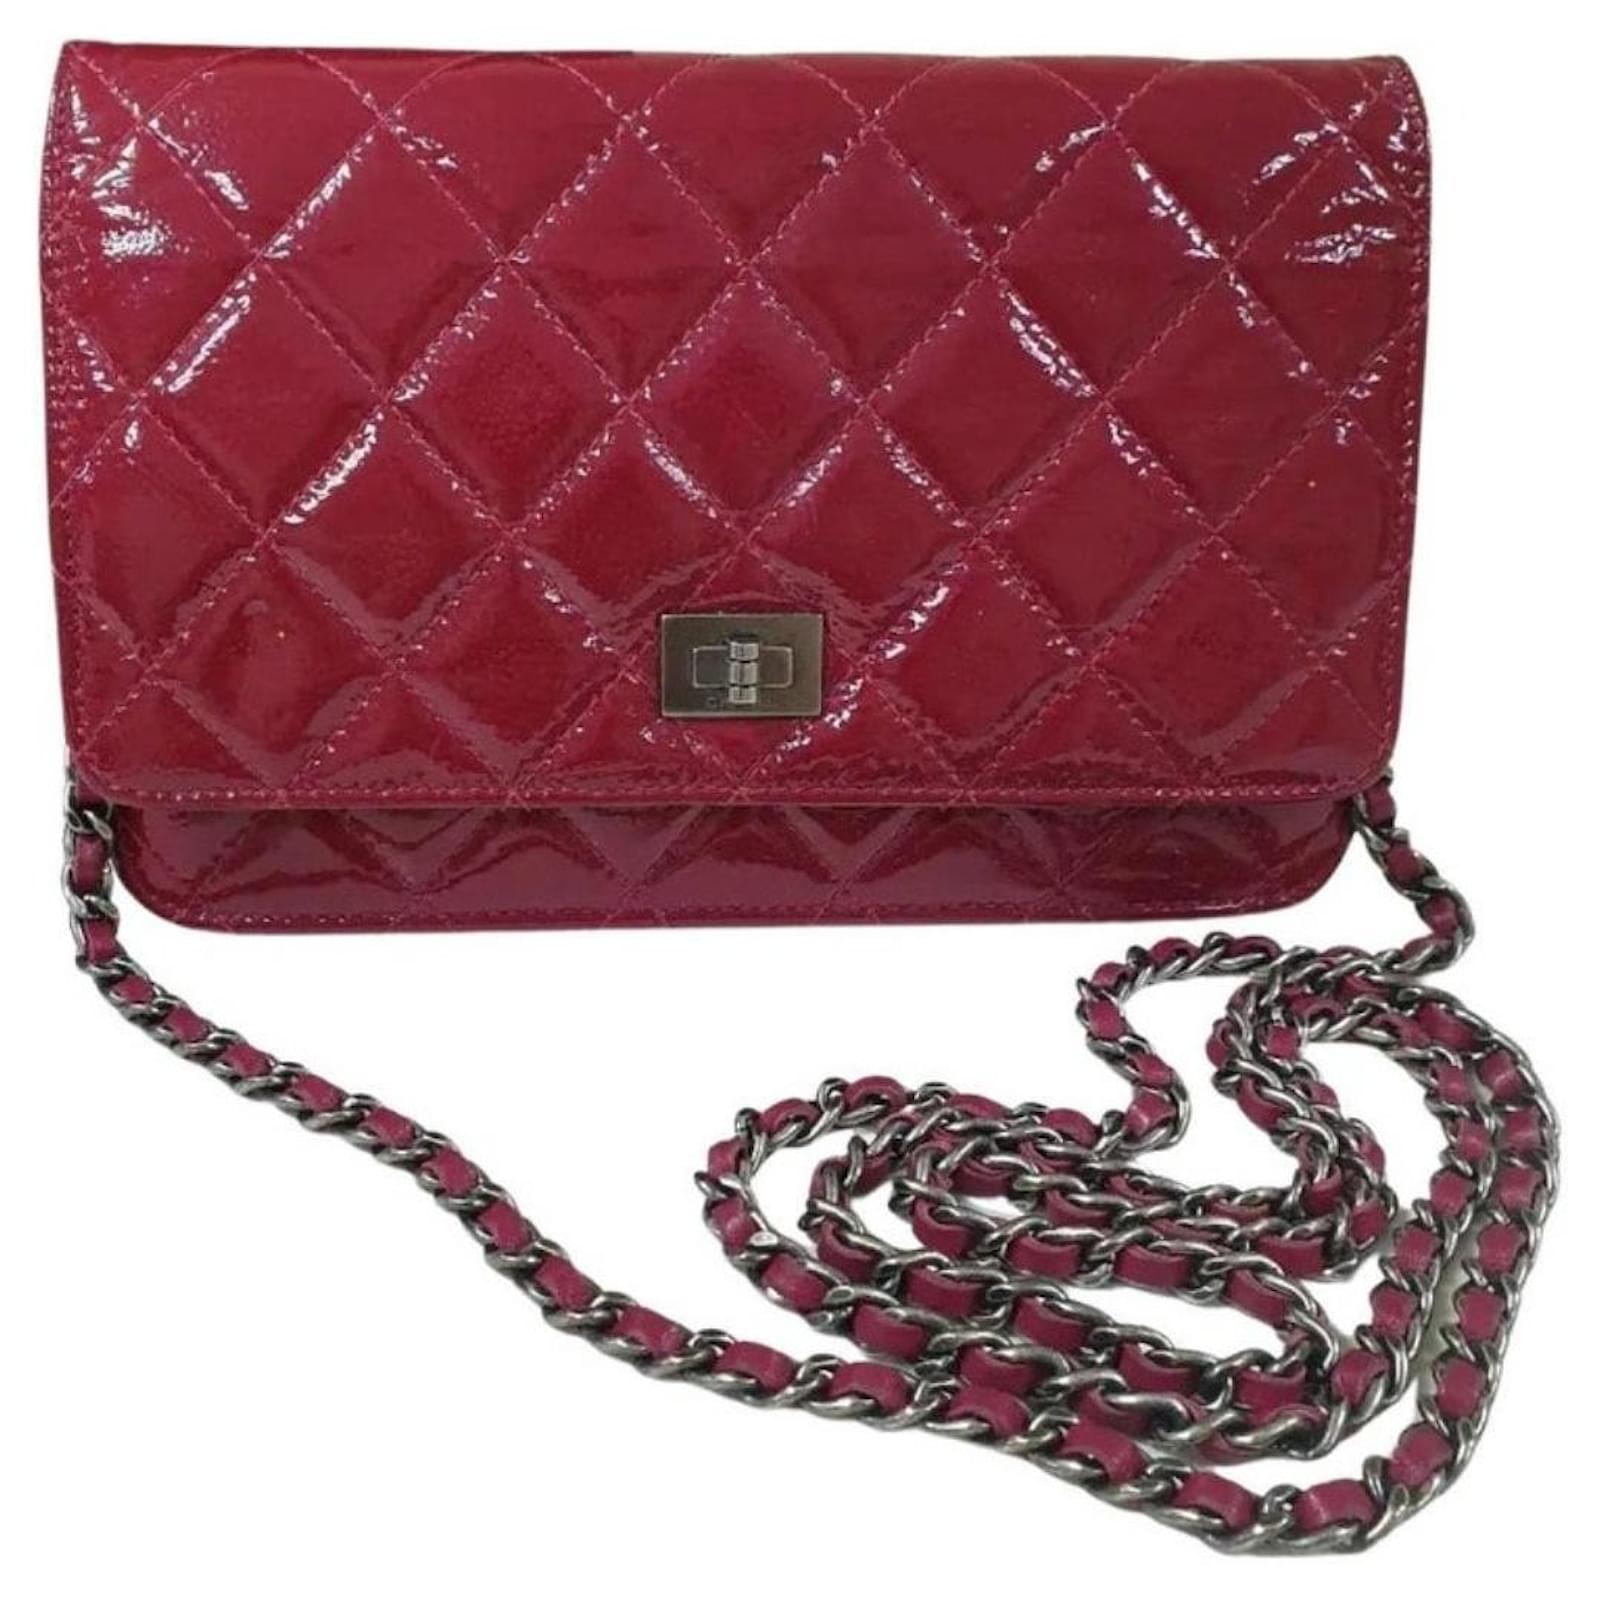 Chanel 2.55 Reissue WOC Red Rouge Patent Leather Bag Dark red ref